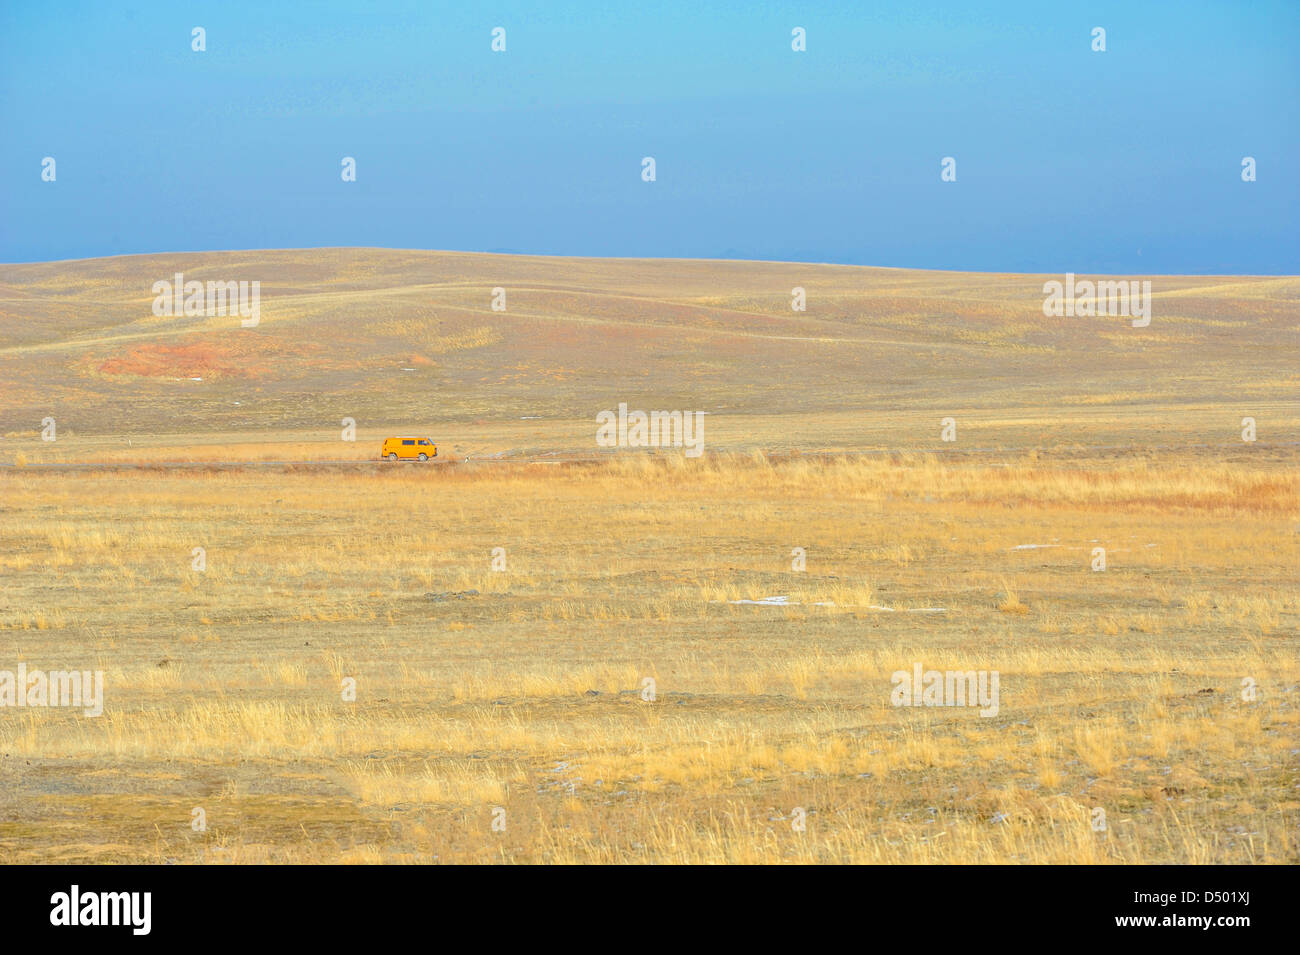 Steppe landscape with a moving orange car Stock Photo